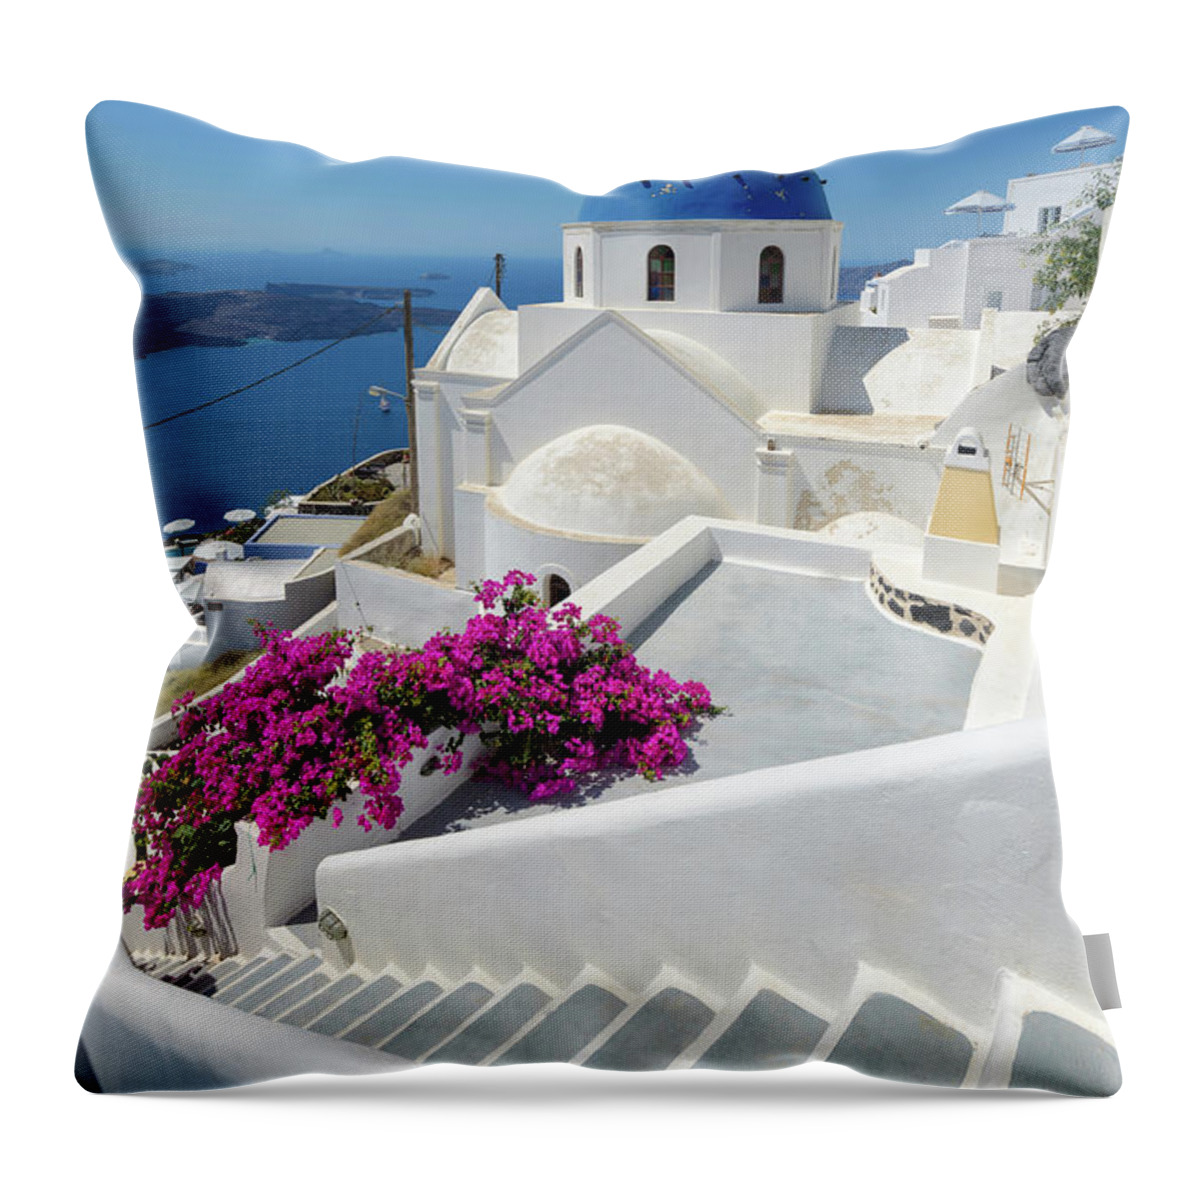 Steps Throw Pillow featuring the photograph Anastasi Church by Photography By Maico Presente